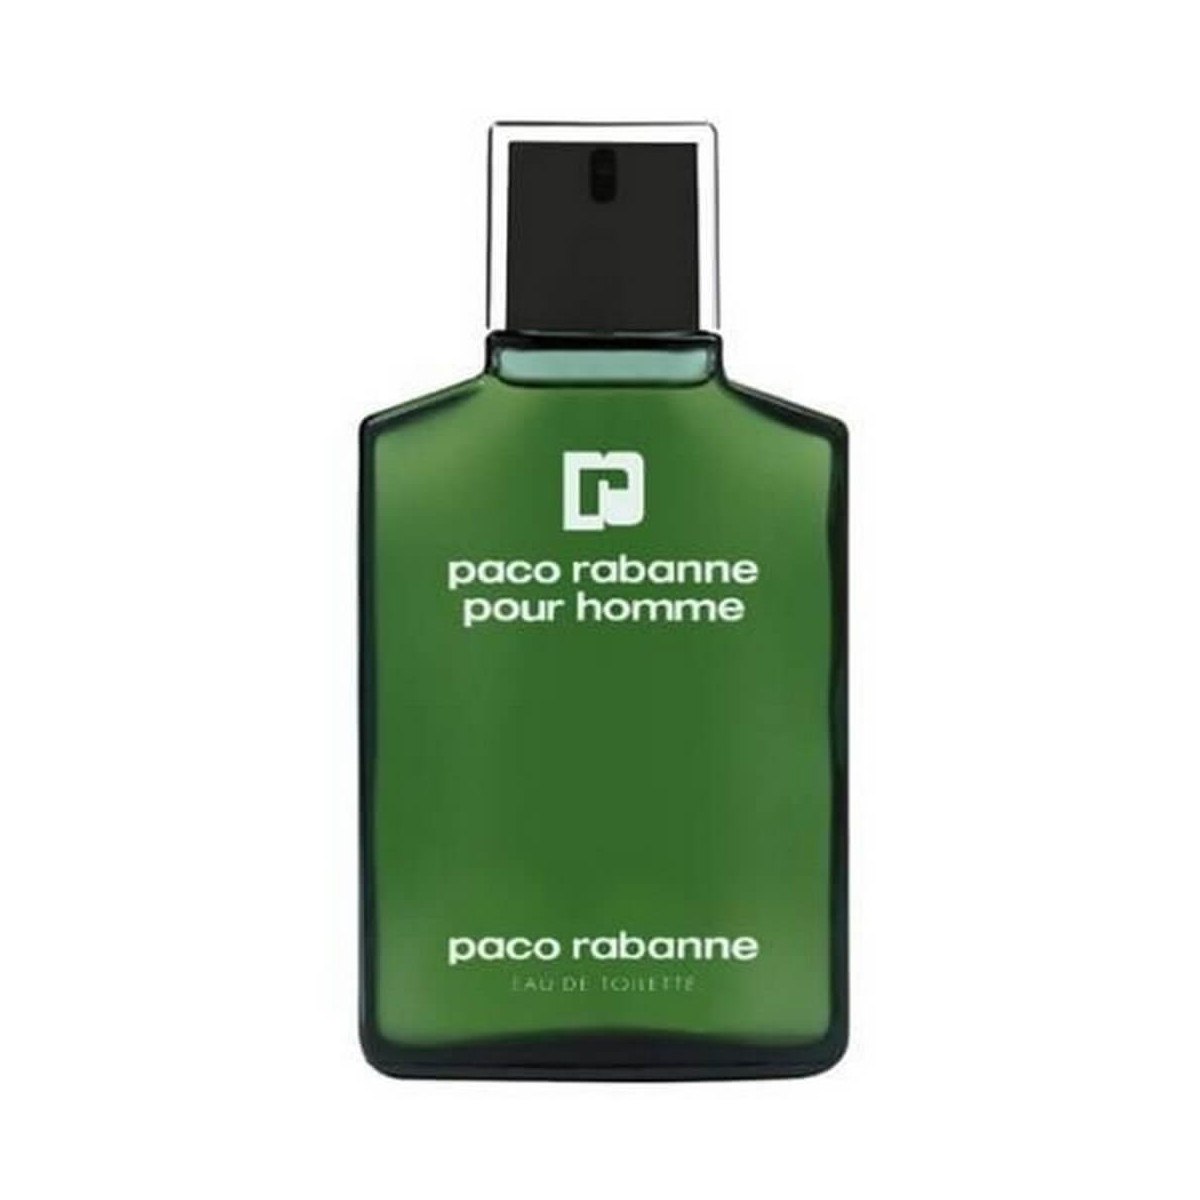 Paco pour homme. Paco Rabanne pour homme 50ml EDT Spray. Paco Rabanne Paco Rabanne pour homme 200 мл. Paco Rabanne XS pour homme туалетная вода 100мл. Paco Rabanne зеленый флакон.